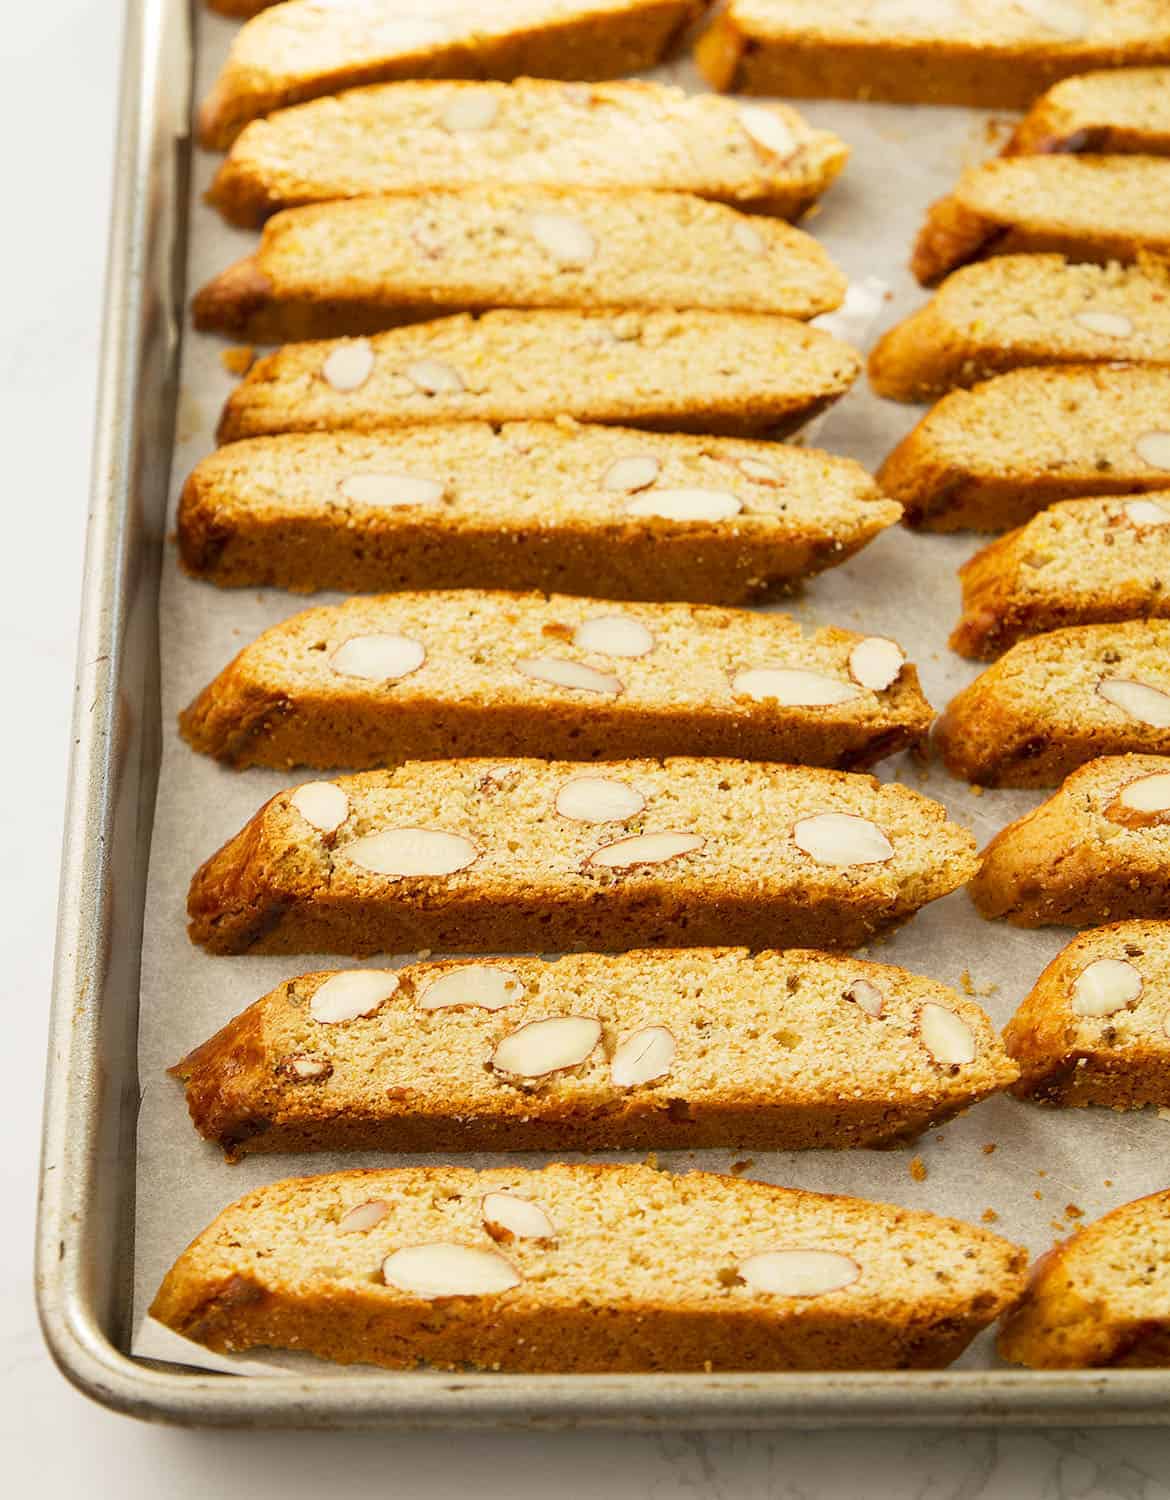 Almond biscotti on a baking tray.